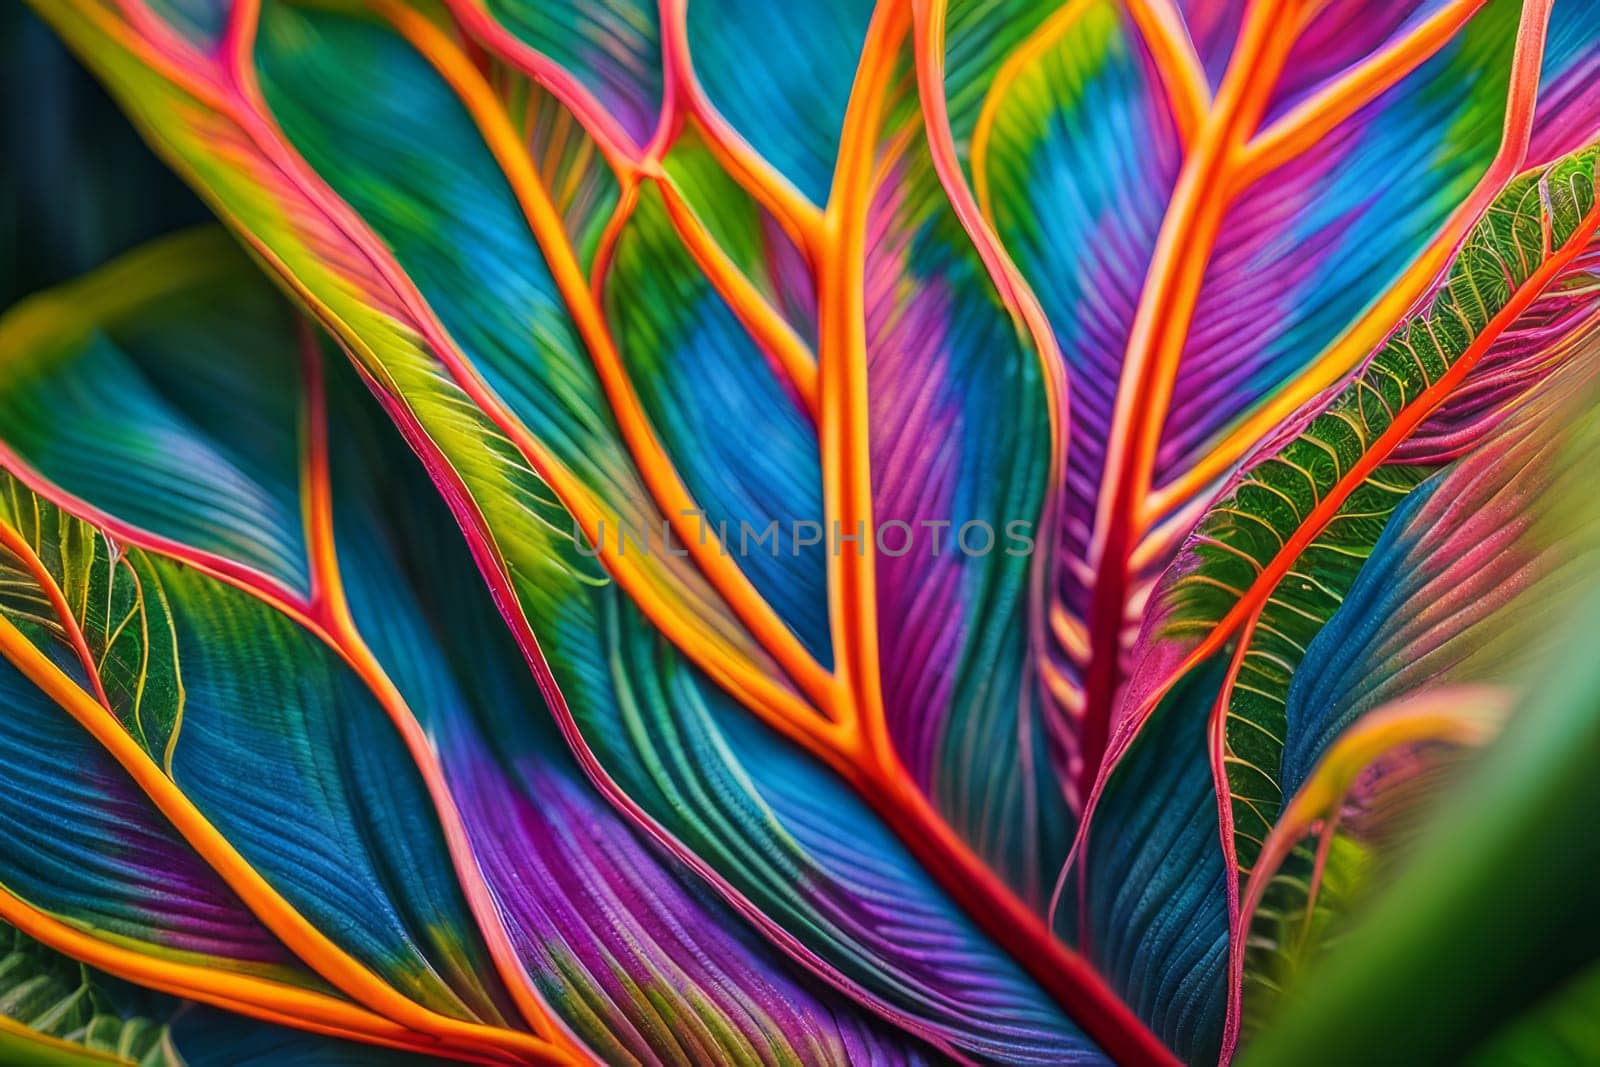 Tropical harmony captured in the vibrant hues of lush jungle leaves. by Annu1tochka